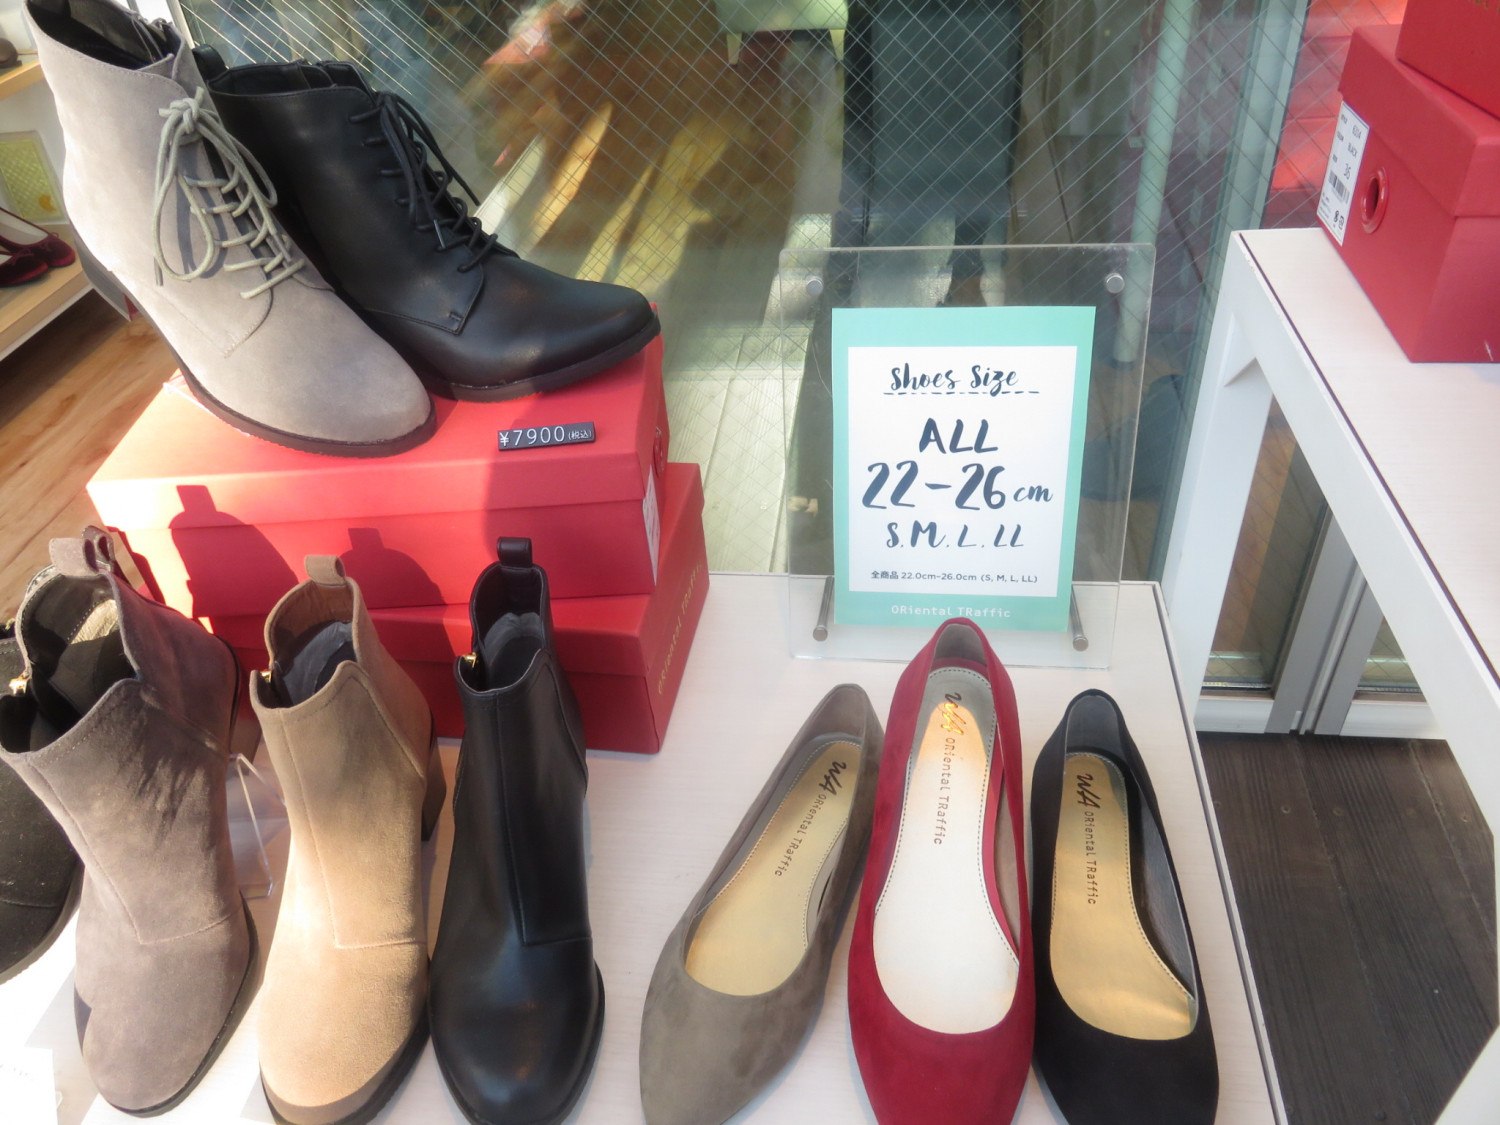 Big (Shoes) in Japan : Where to Get Massive Kicks in Tokyo!